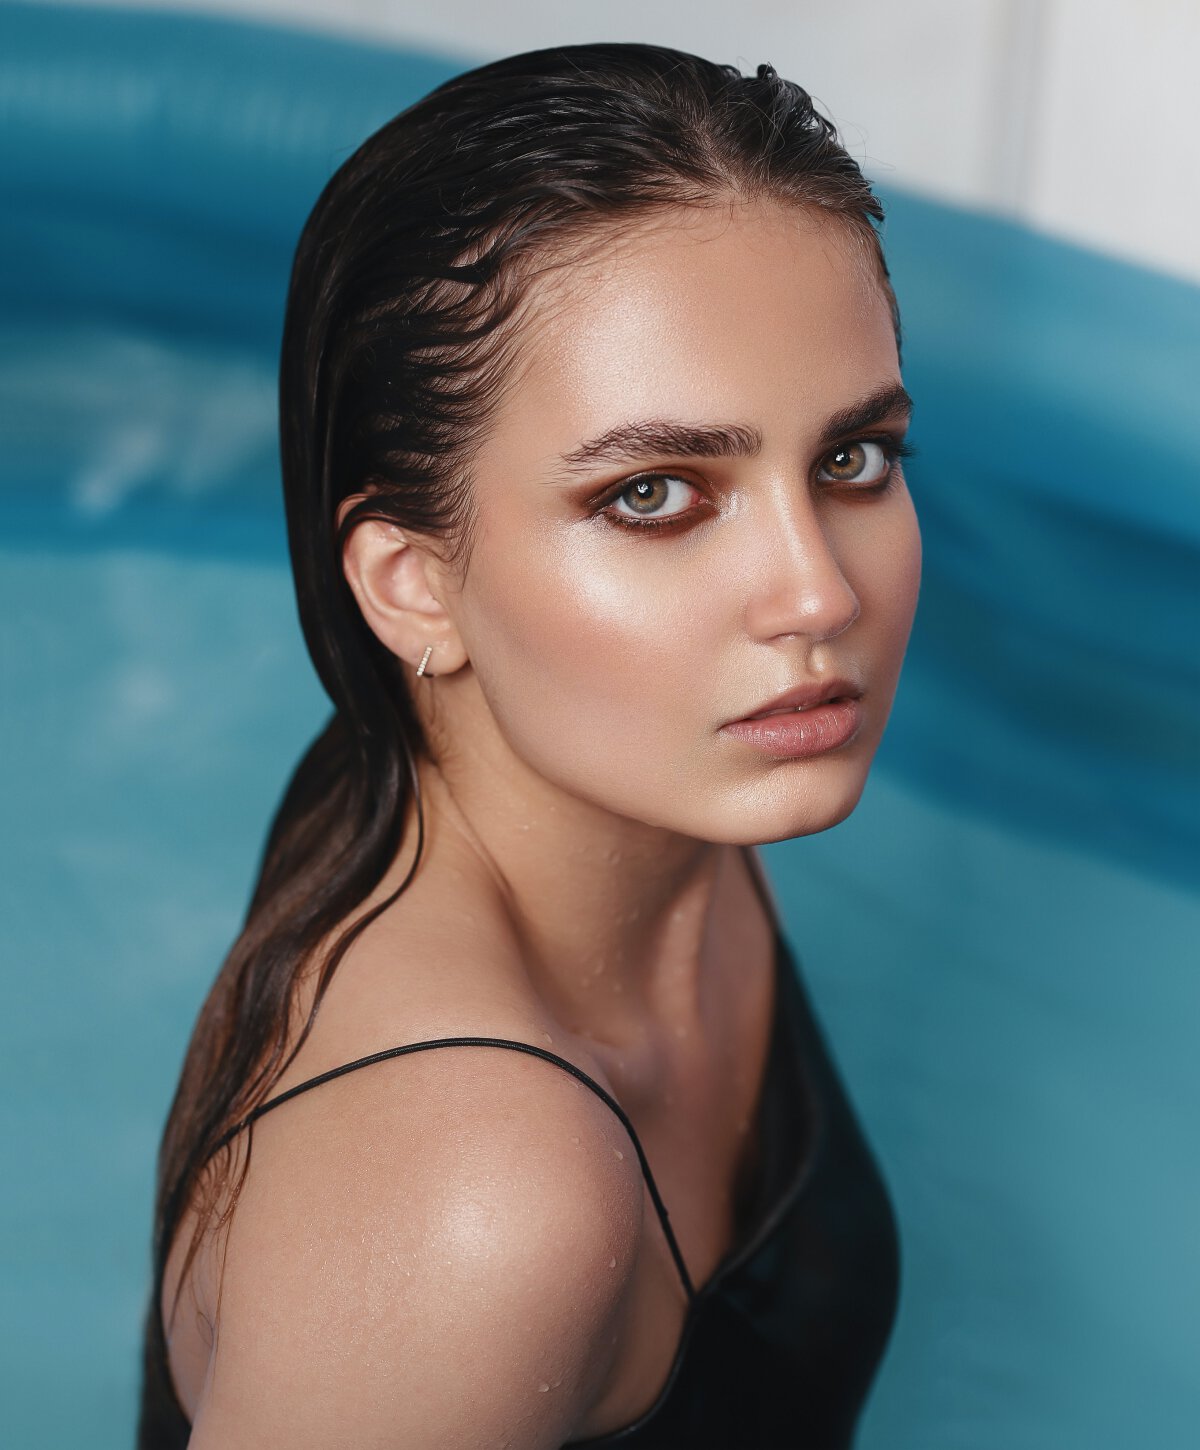 Los Angeles kybella patient model with brown hair in a pool